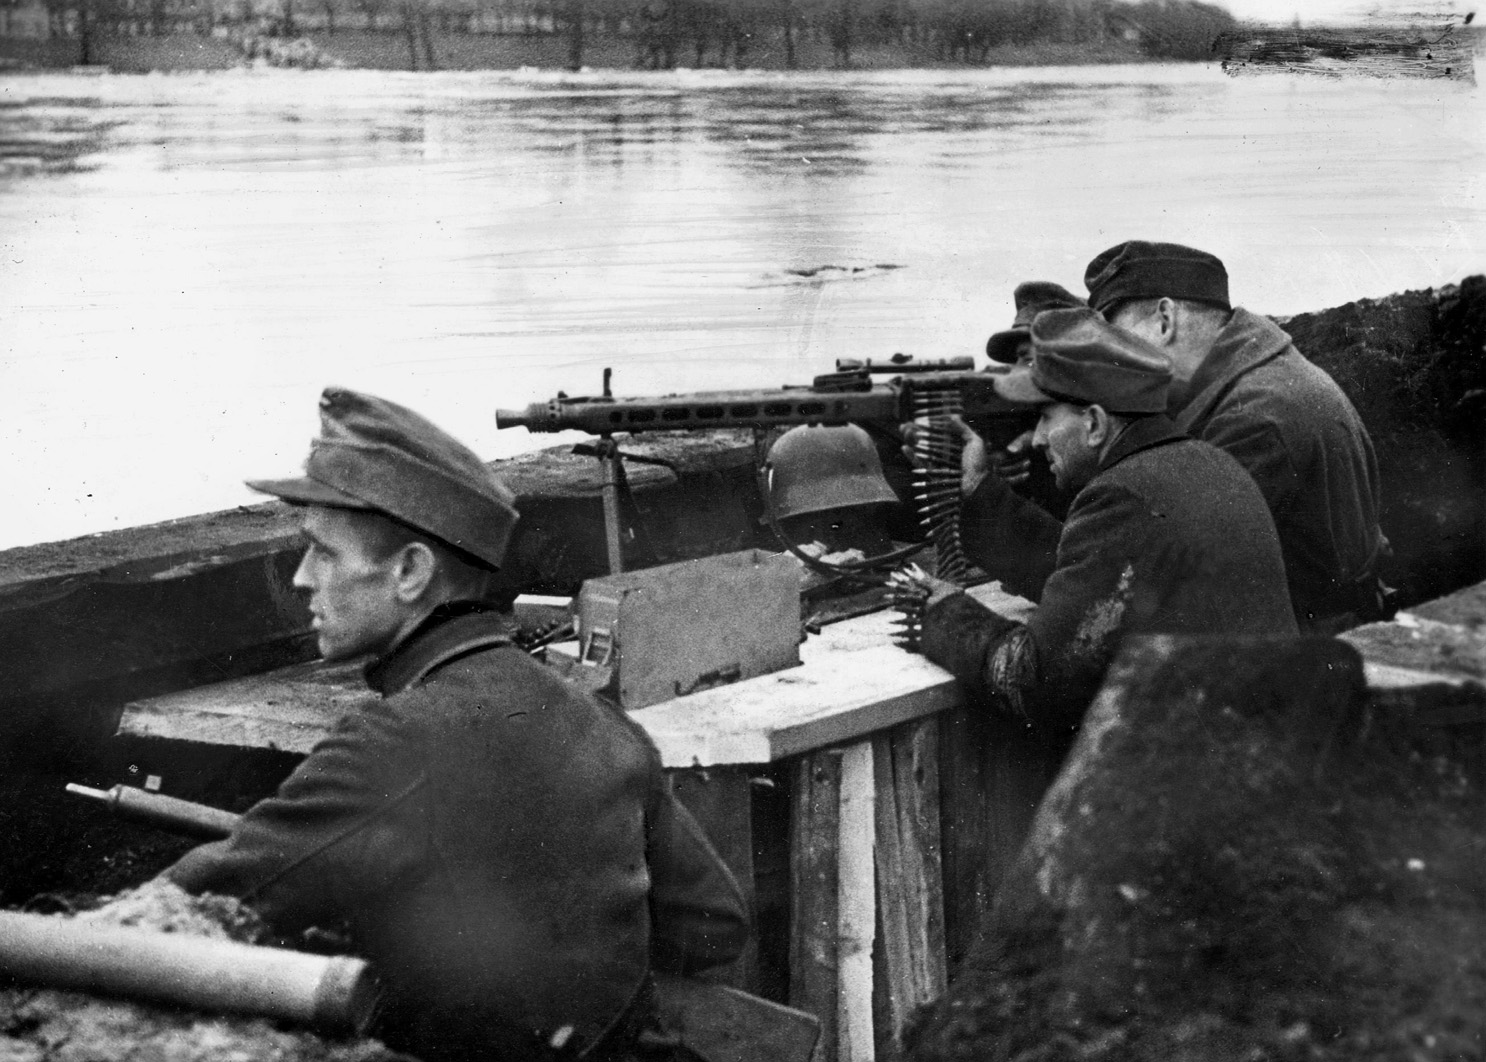 German troops man an MG 42 along the western bank of the Oder River on the Eastern Front in the final months of World War II. The versatile MG 42 could be used with a tripod as a heavy machine gun remaining in a fixed position or with a bipod as a light machine gun when needed to counterattack an enemy assault.